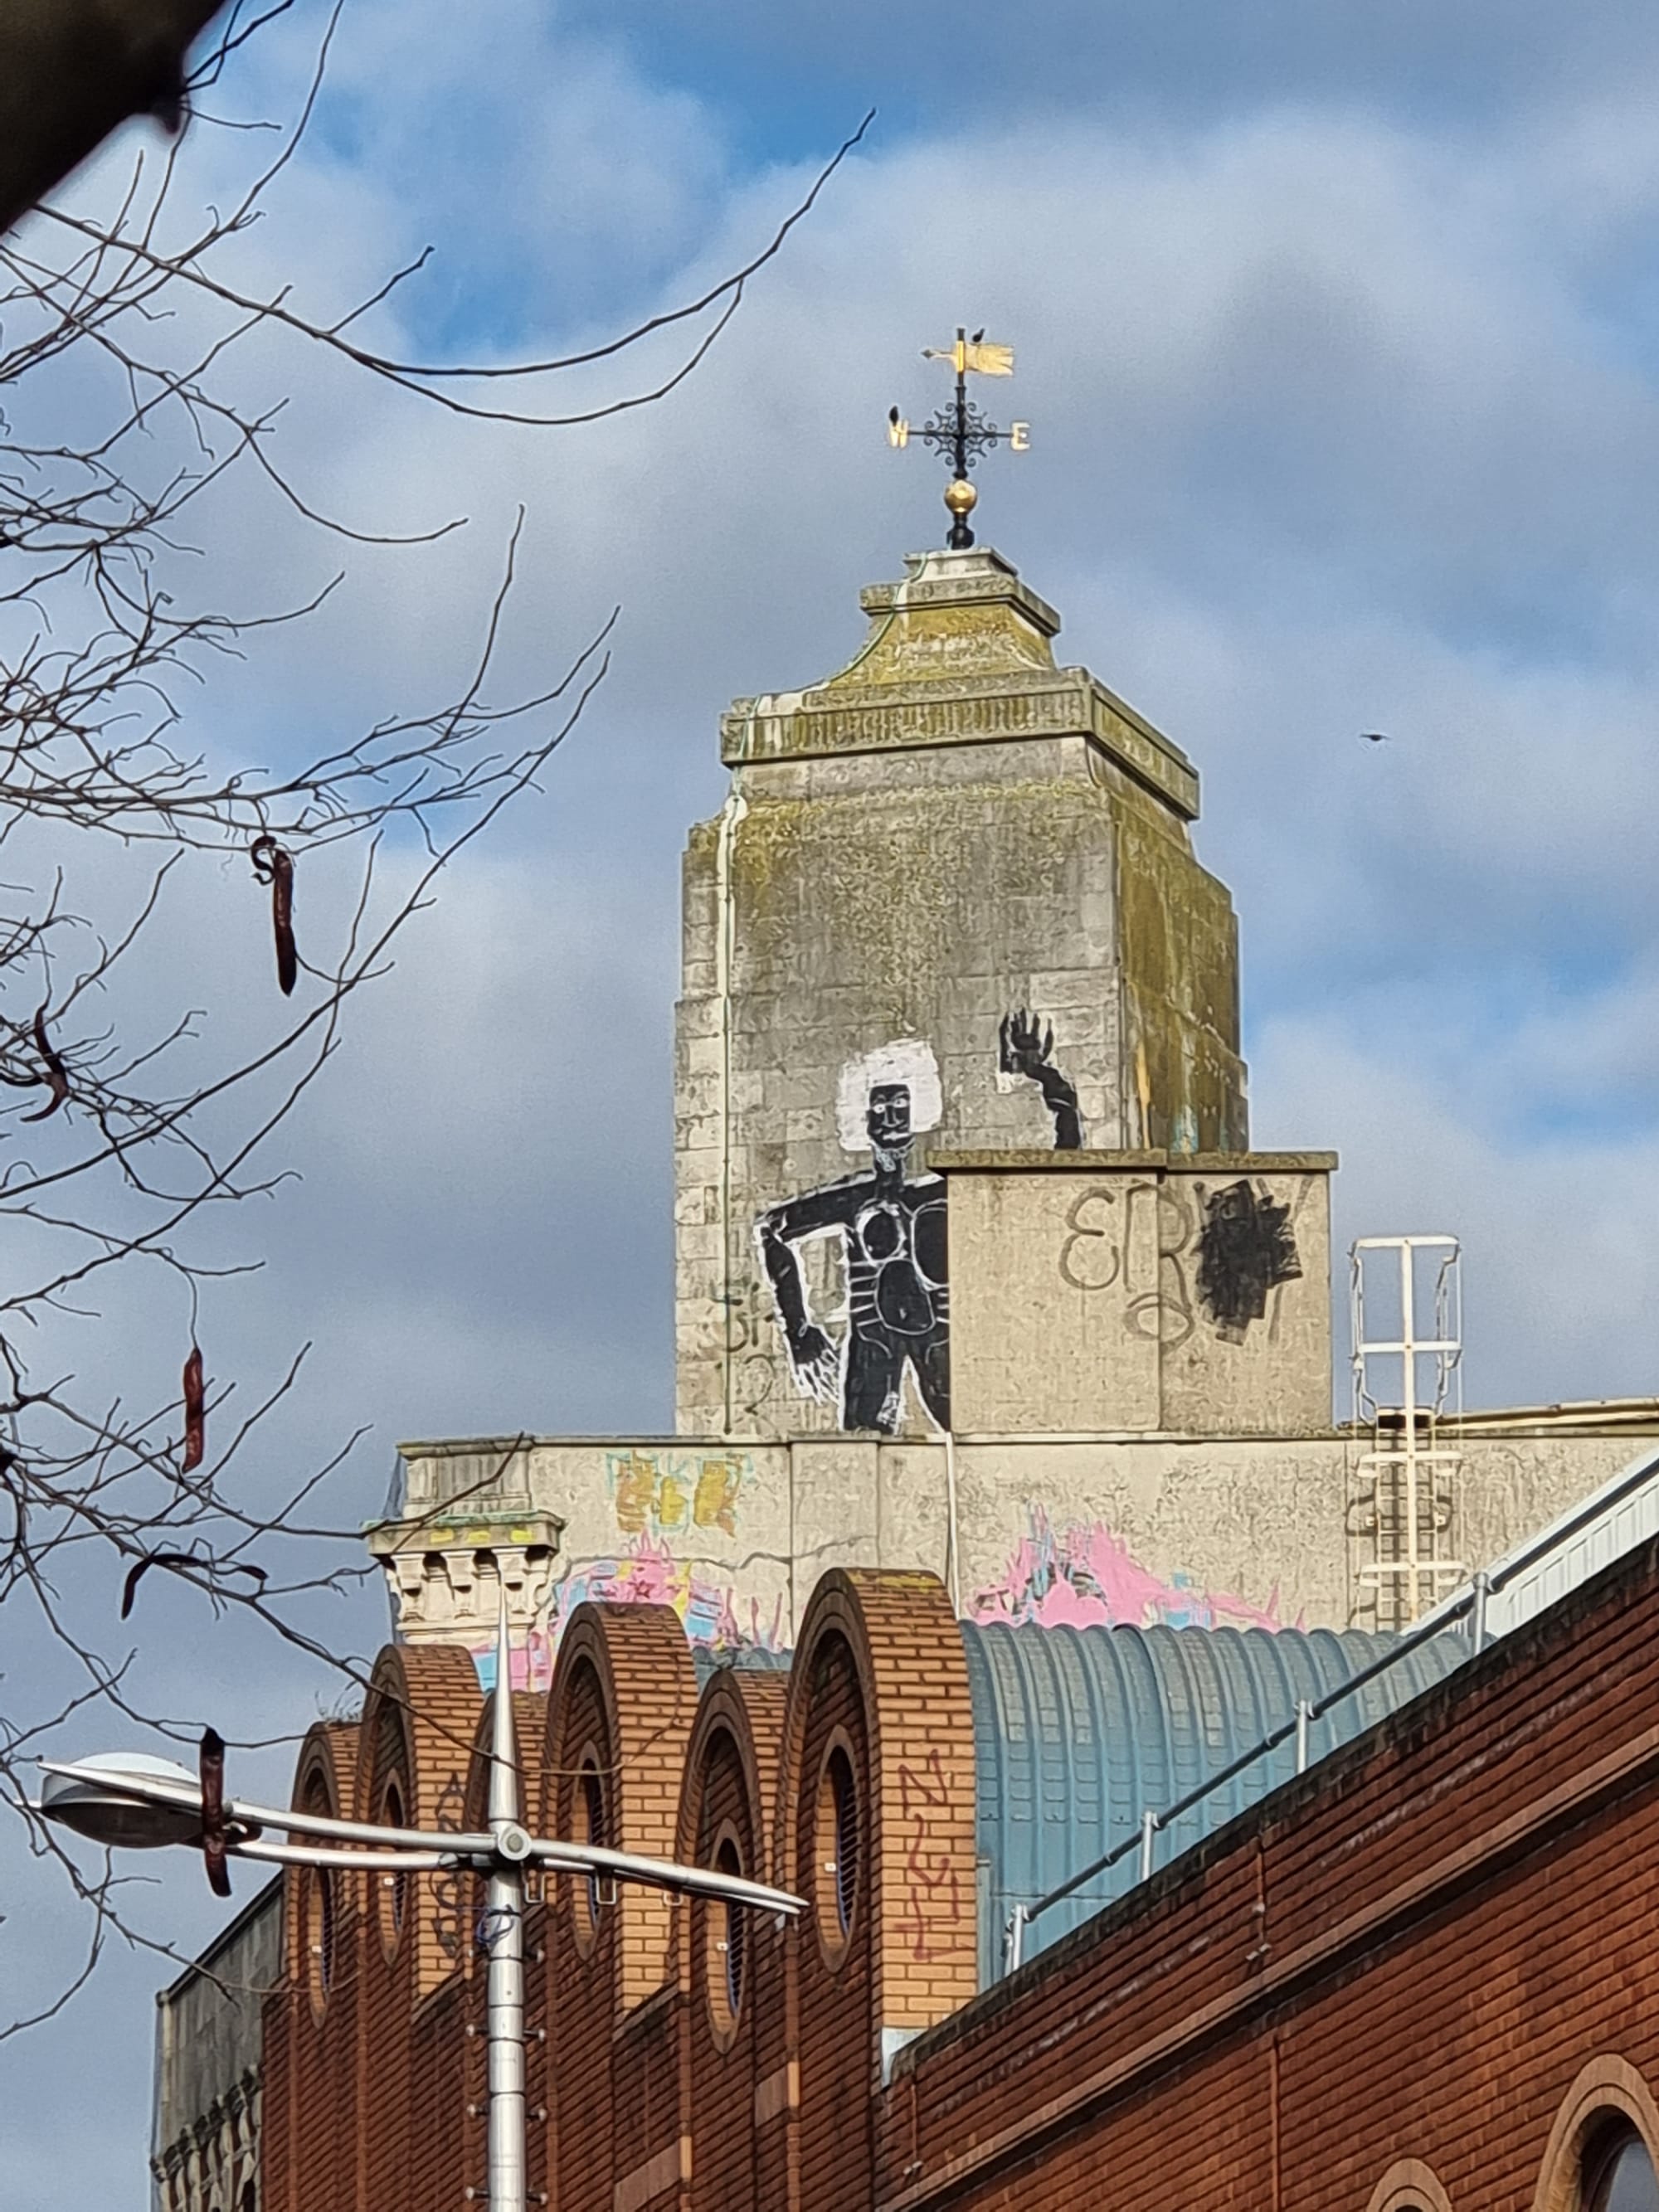 A painted figure, black body, white hair, on a tower high up above Peckham high street.